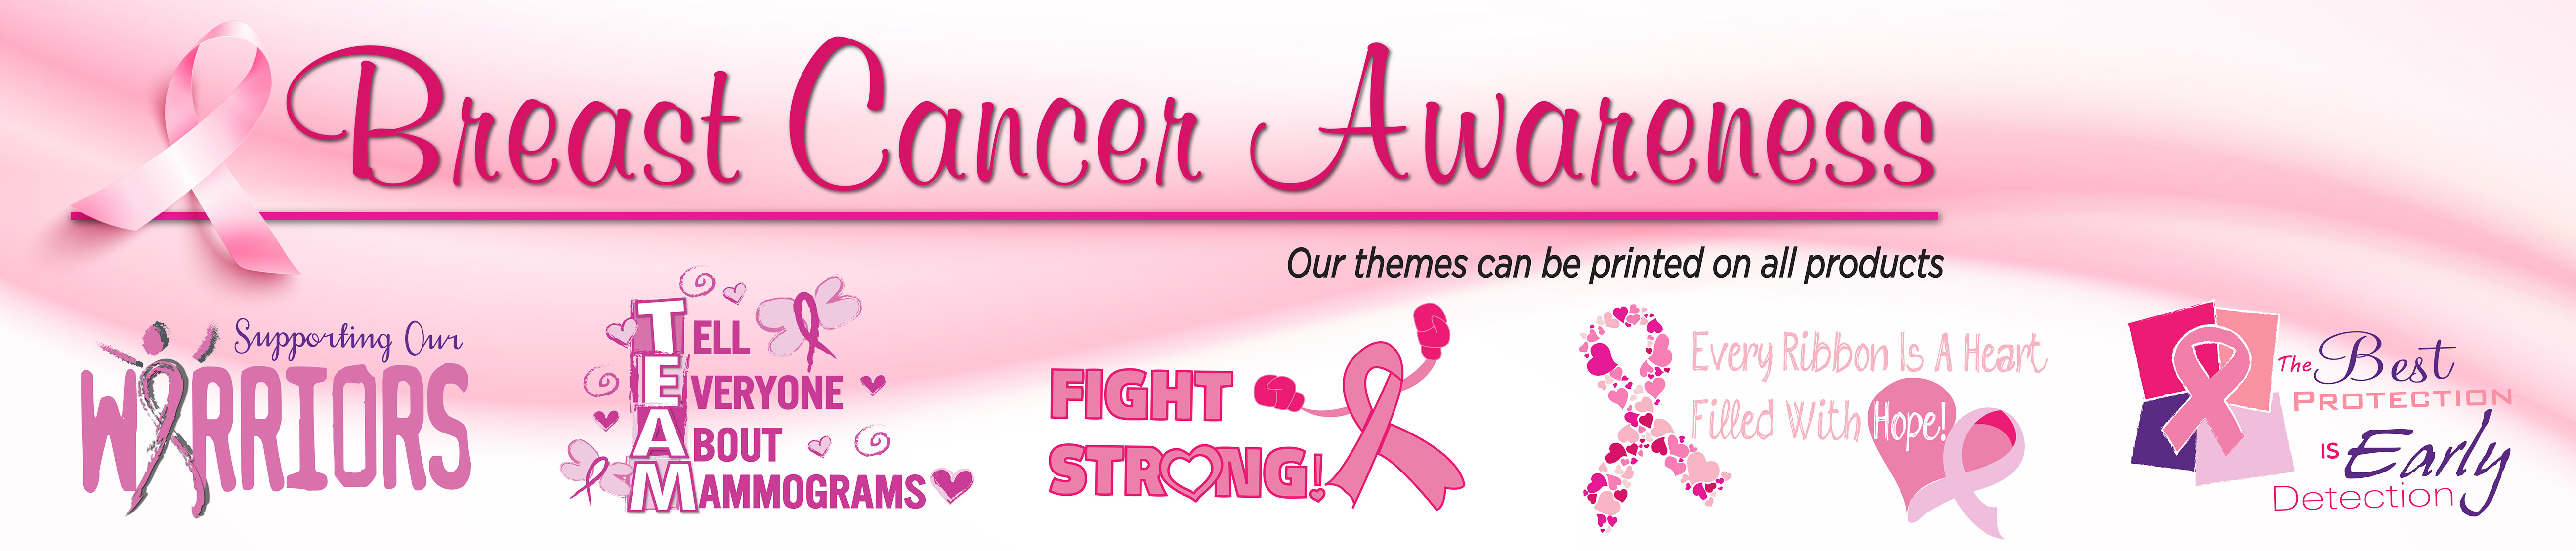 Breast Cancer Awareness Merchandise Slogans | Care Promotions